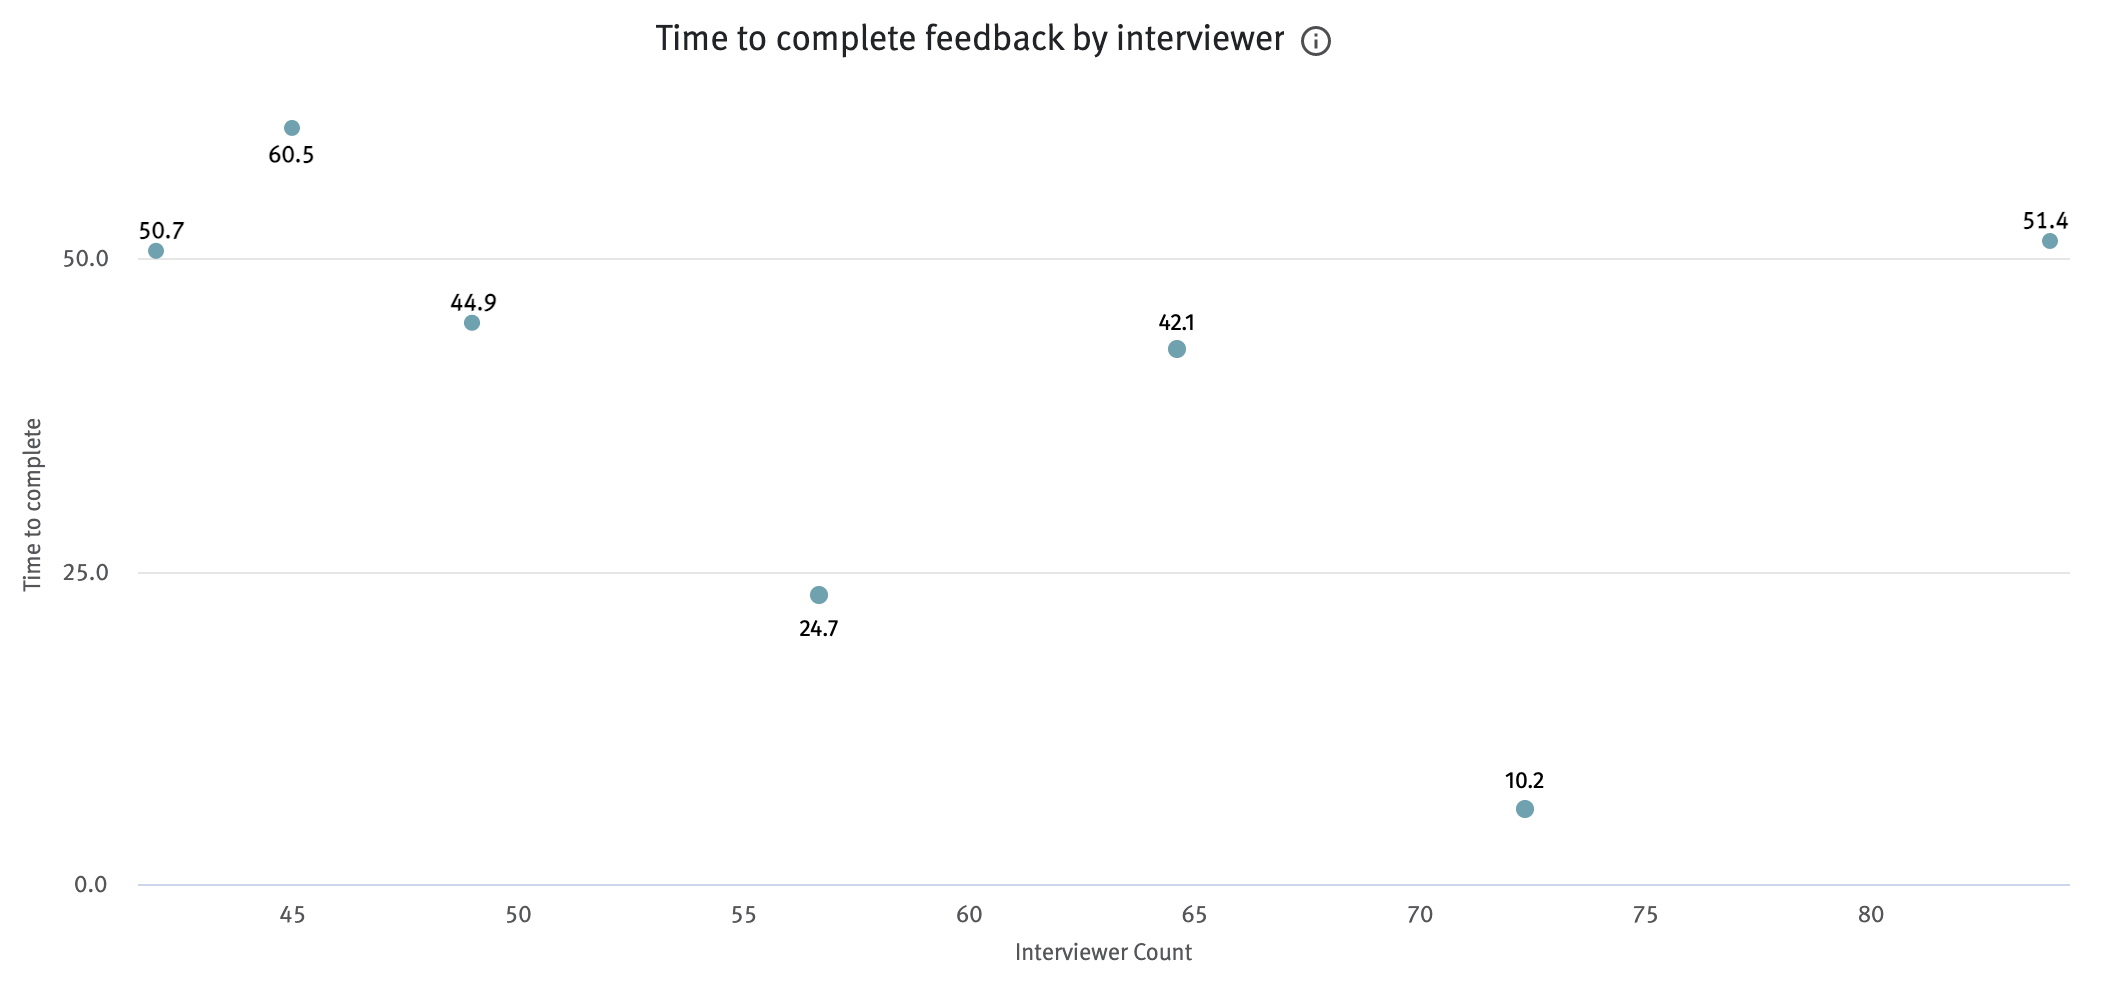 Time to complete feedback by interviewer chart